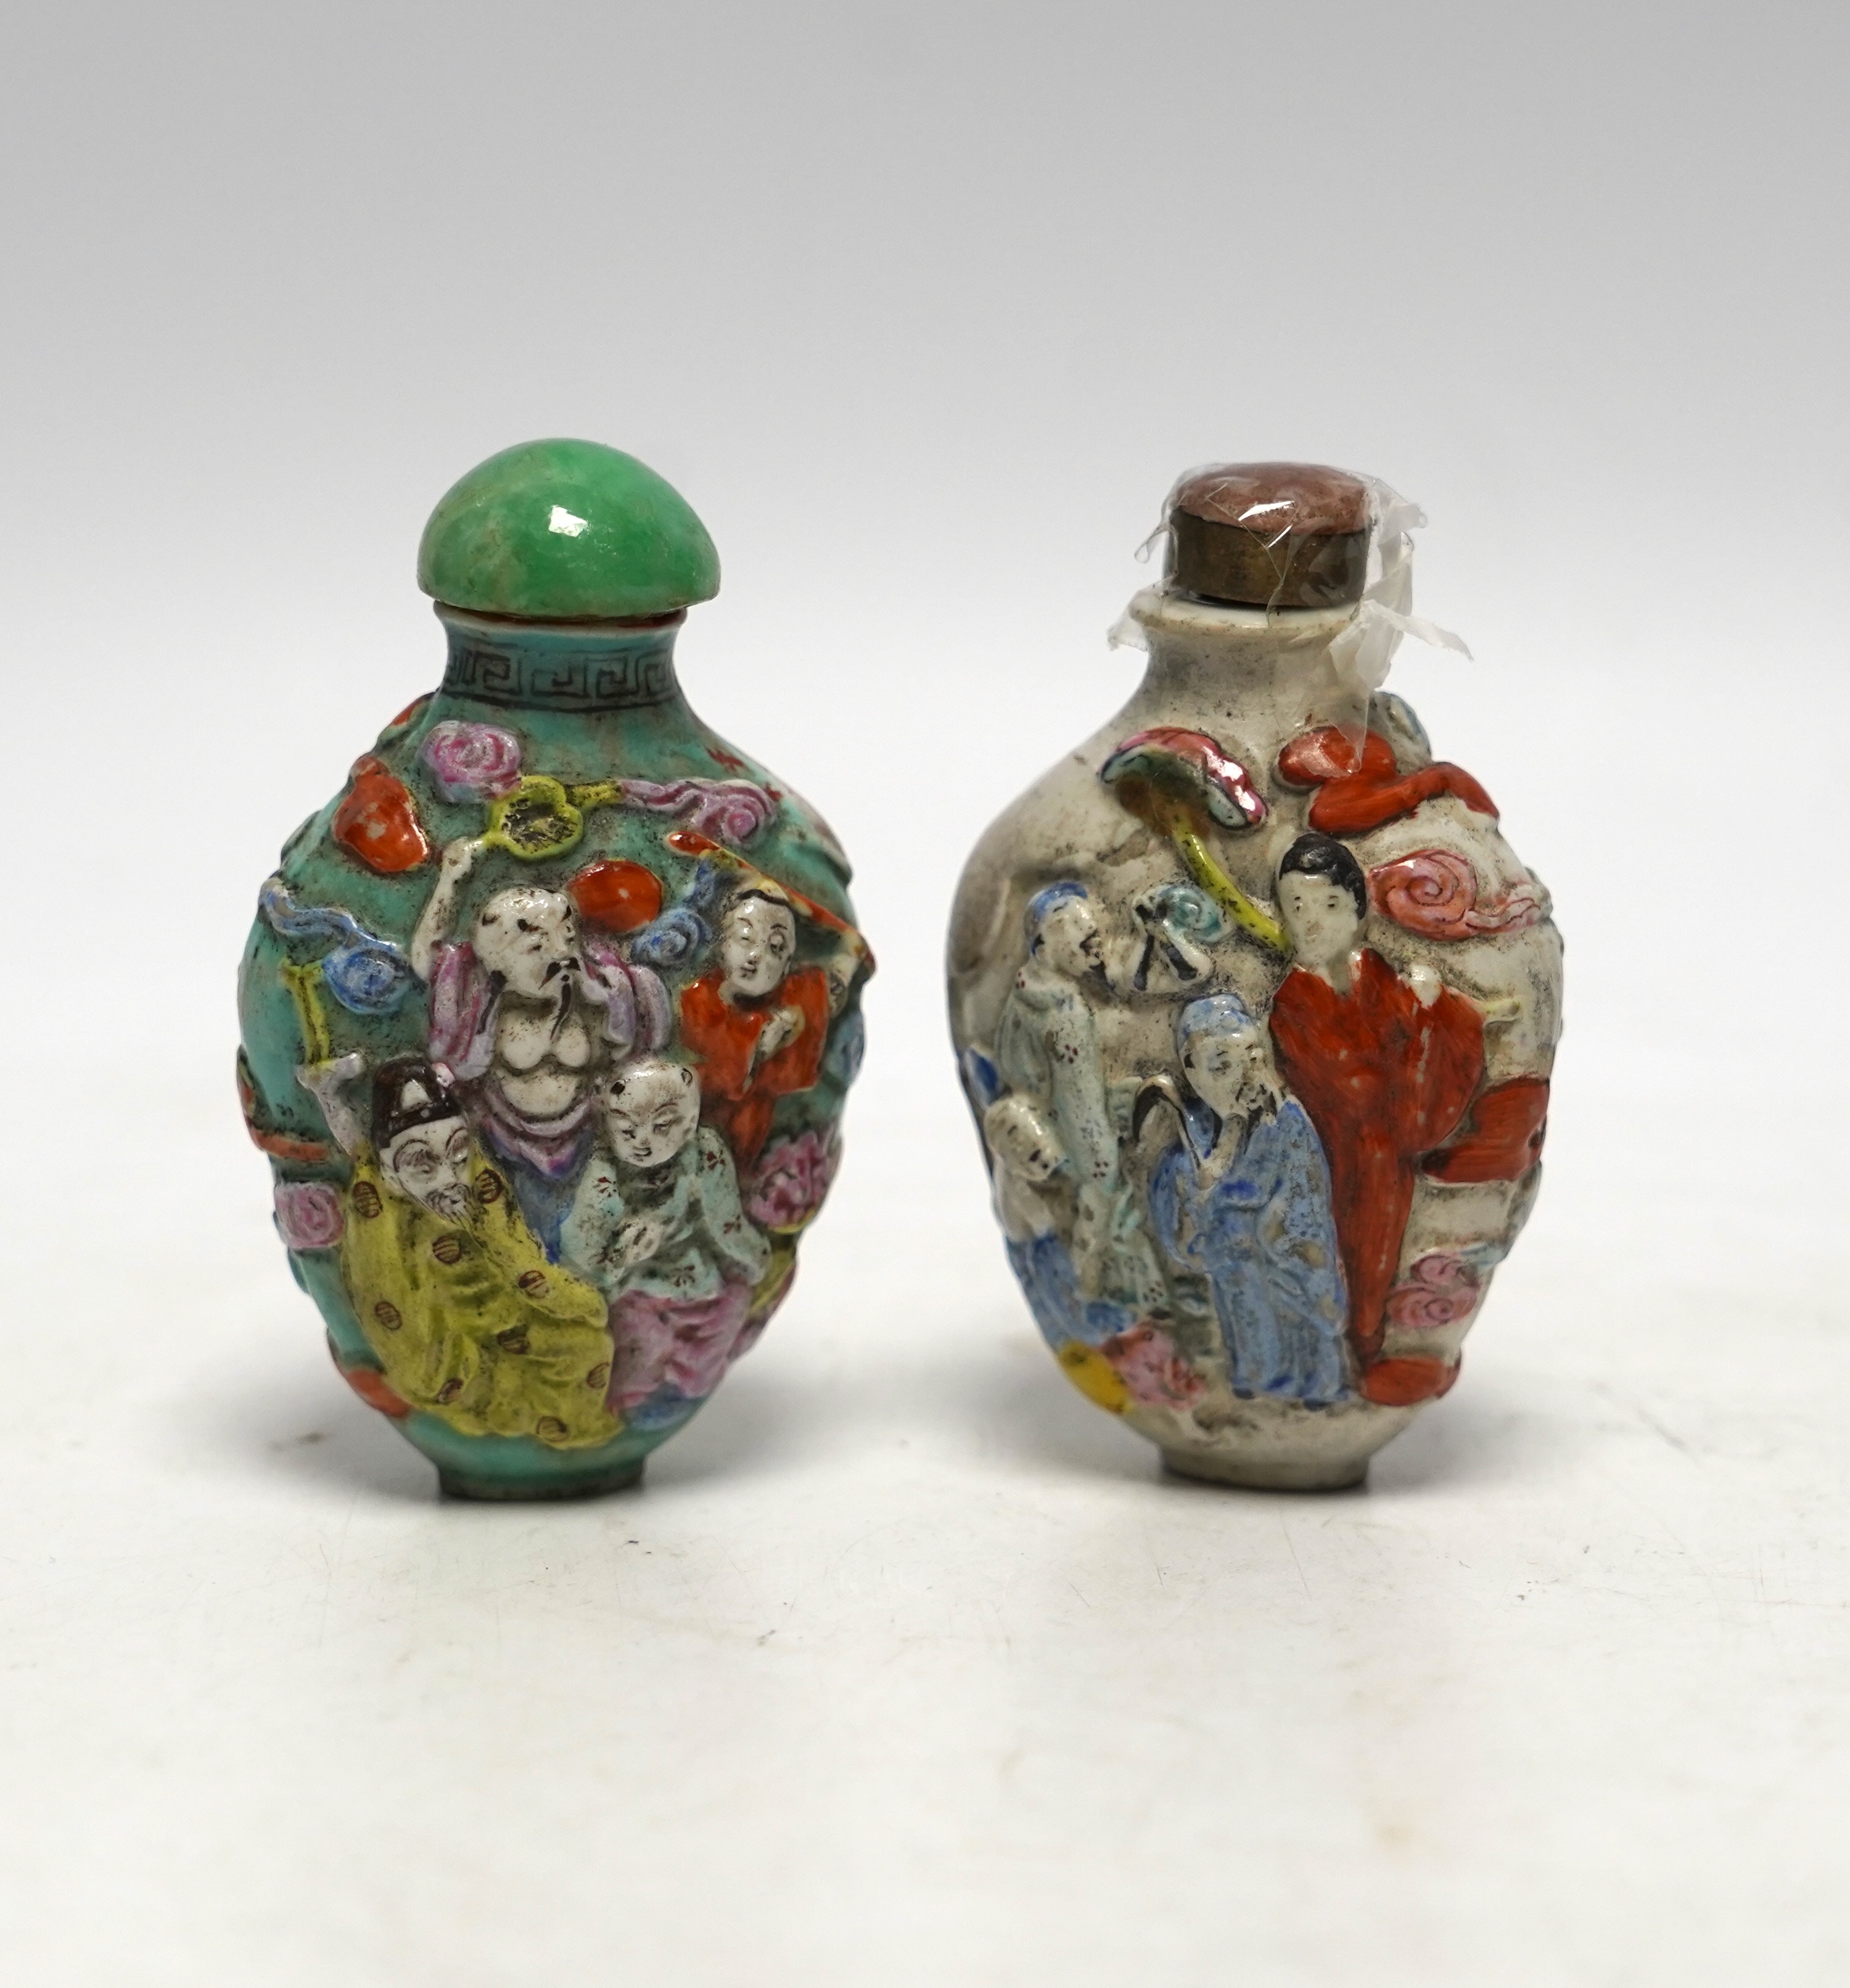 Two 19th century Chinese moulded and enamelled porcelain ’eight immortals’ snuff bottles, largest 8cm high                                                                                                                  